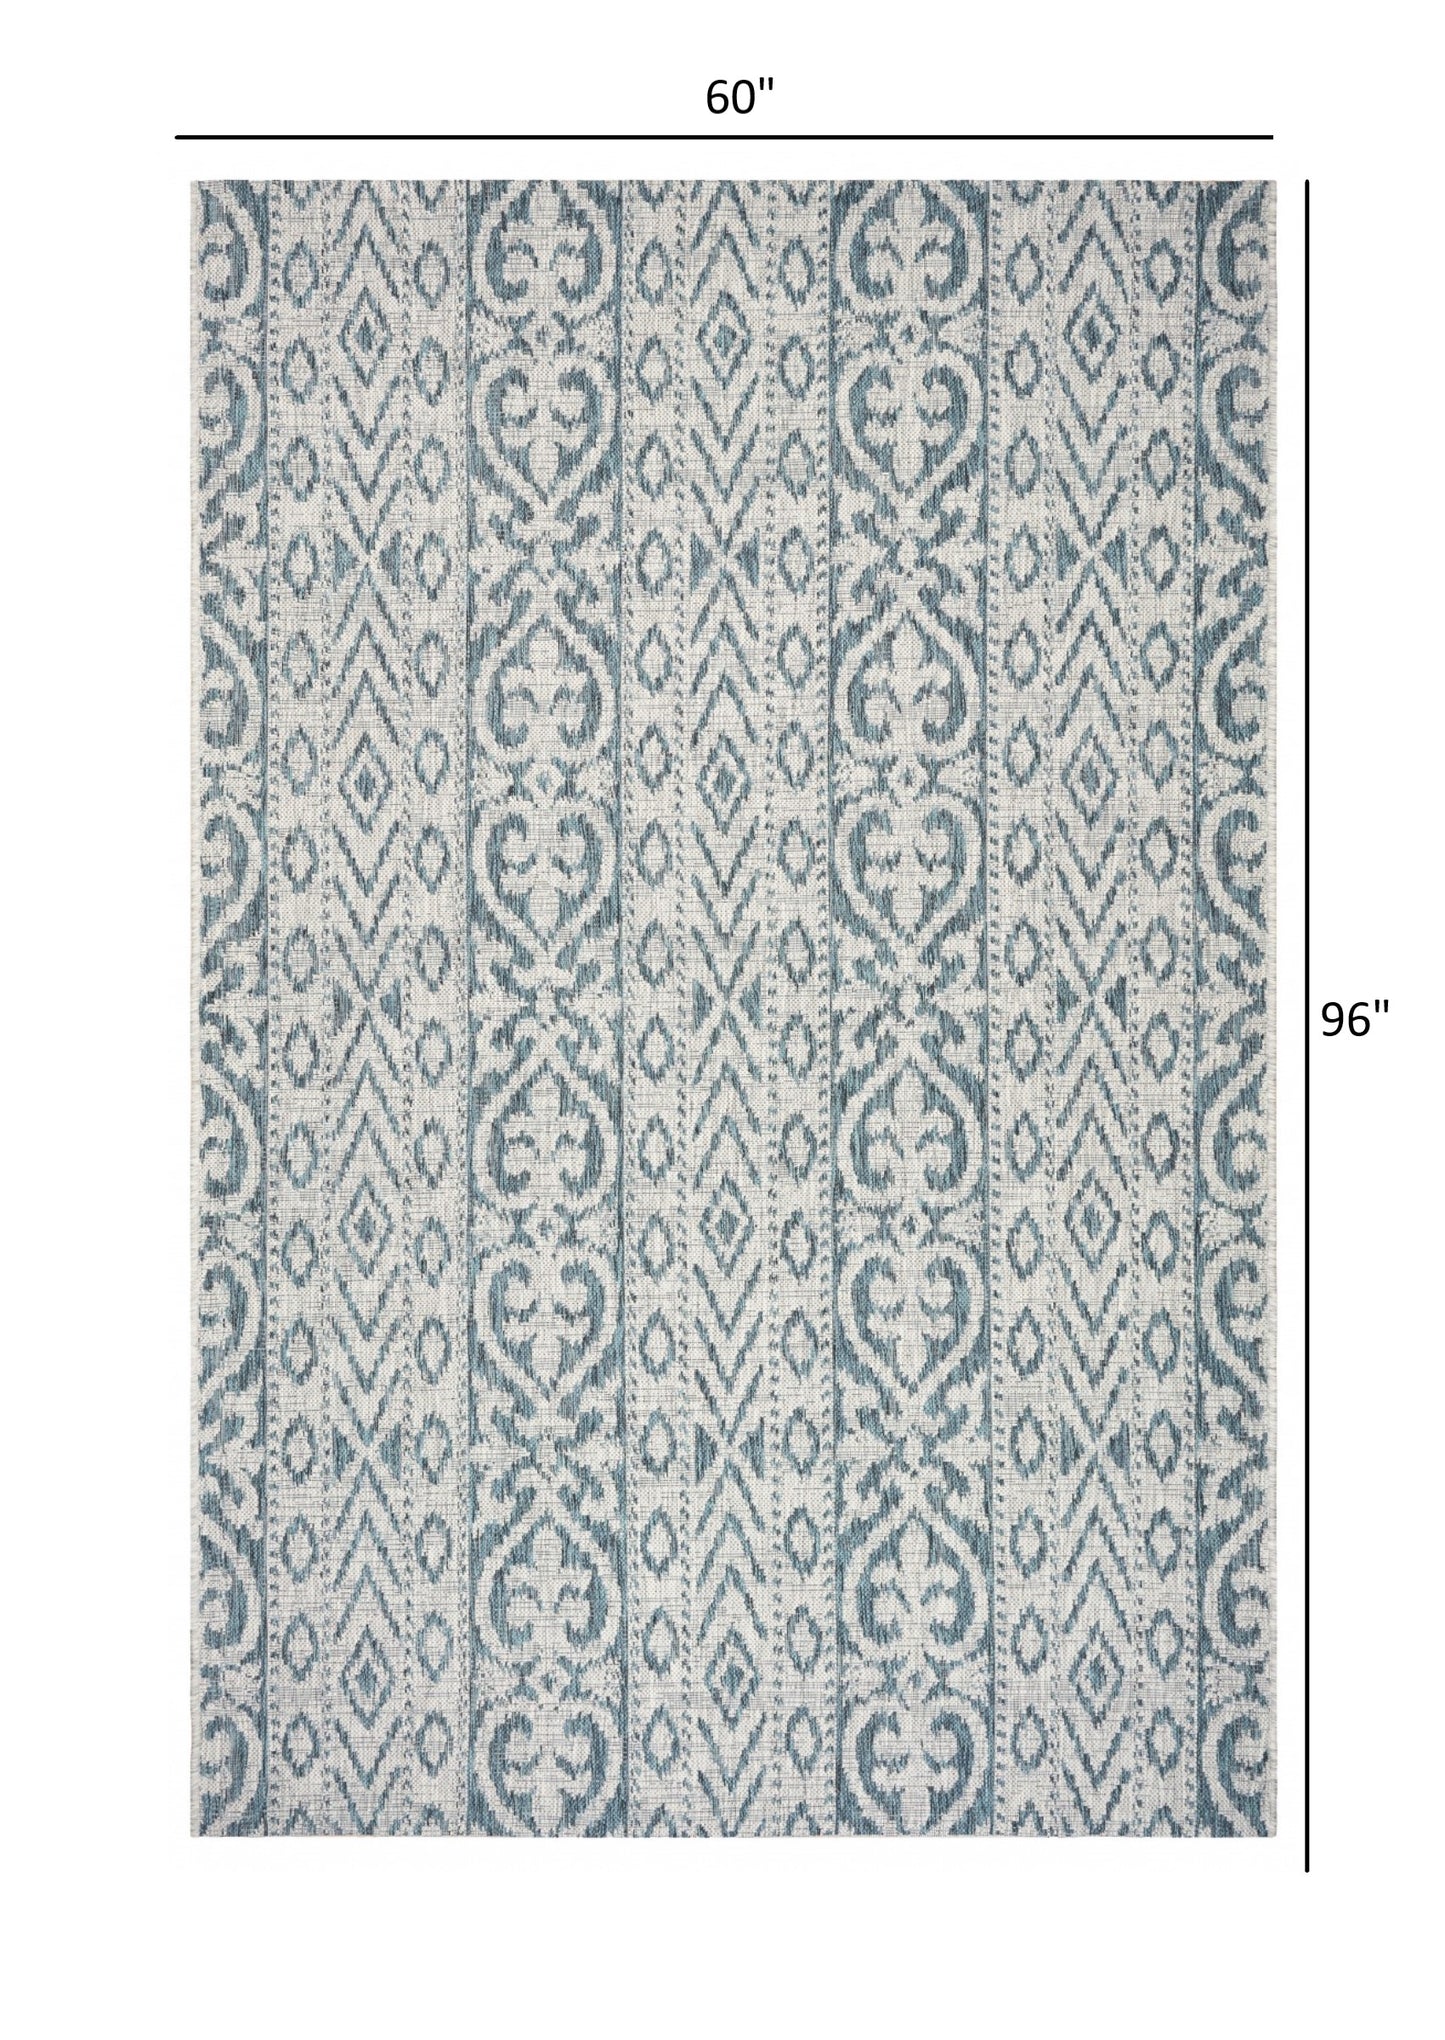 8' X 10' Blue And White Indoor Outdoor Area Rug